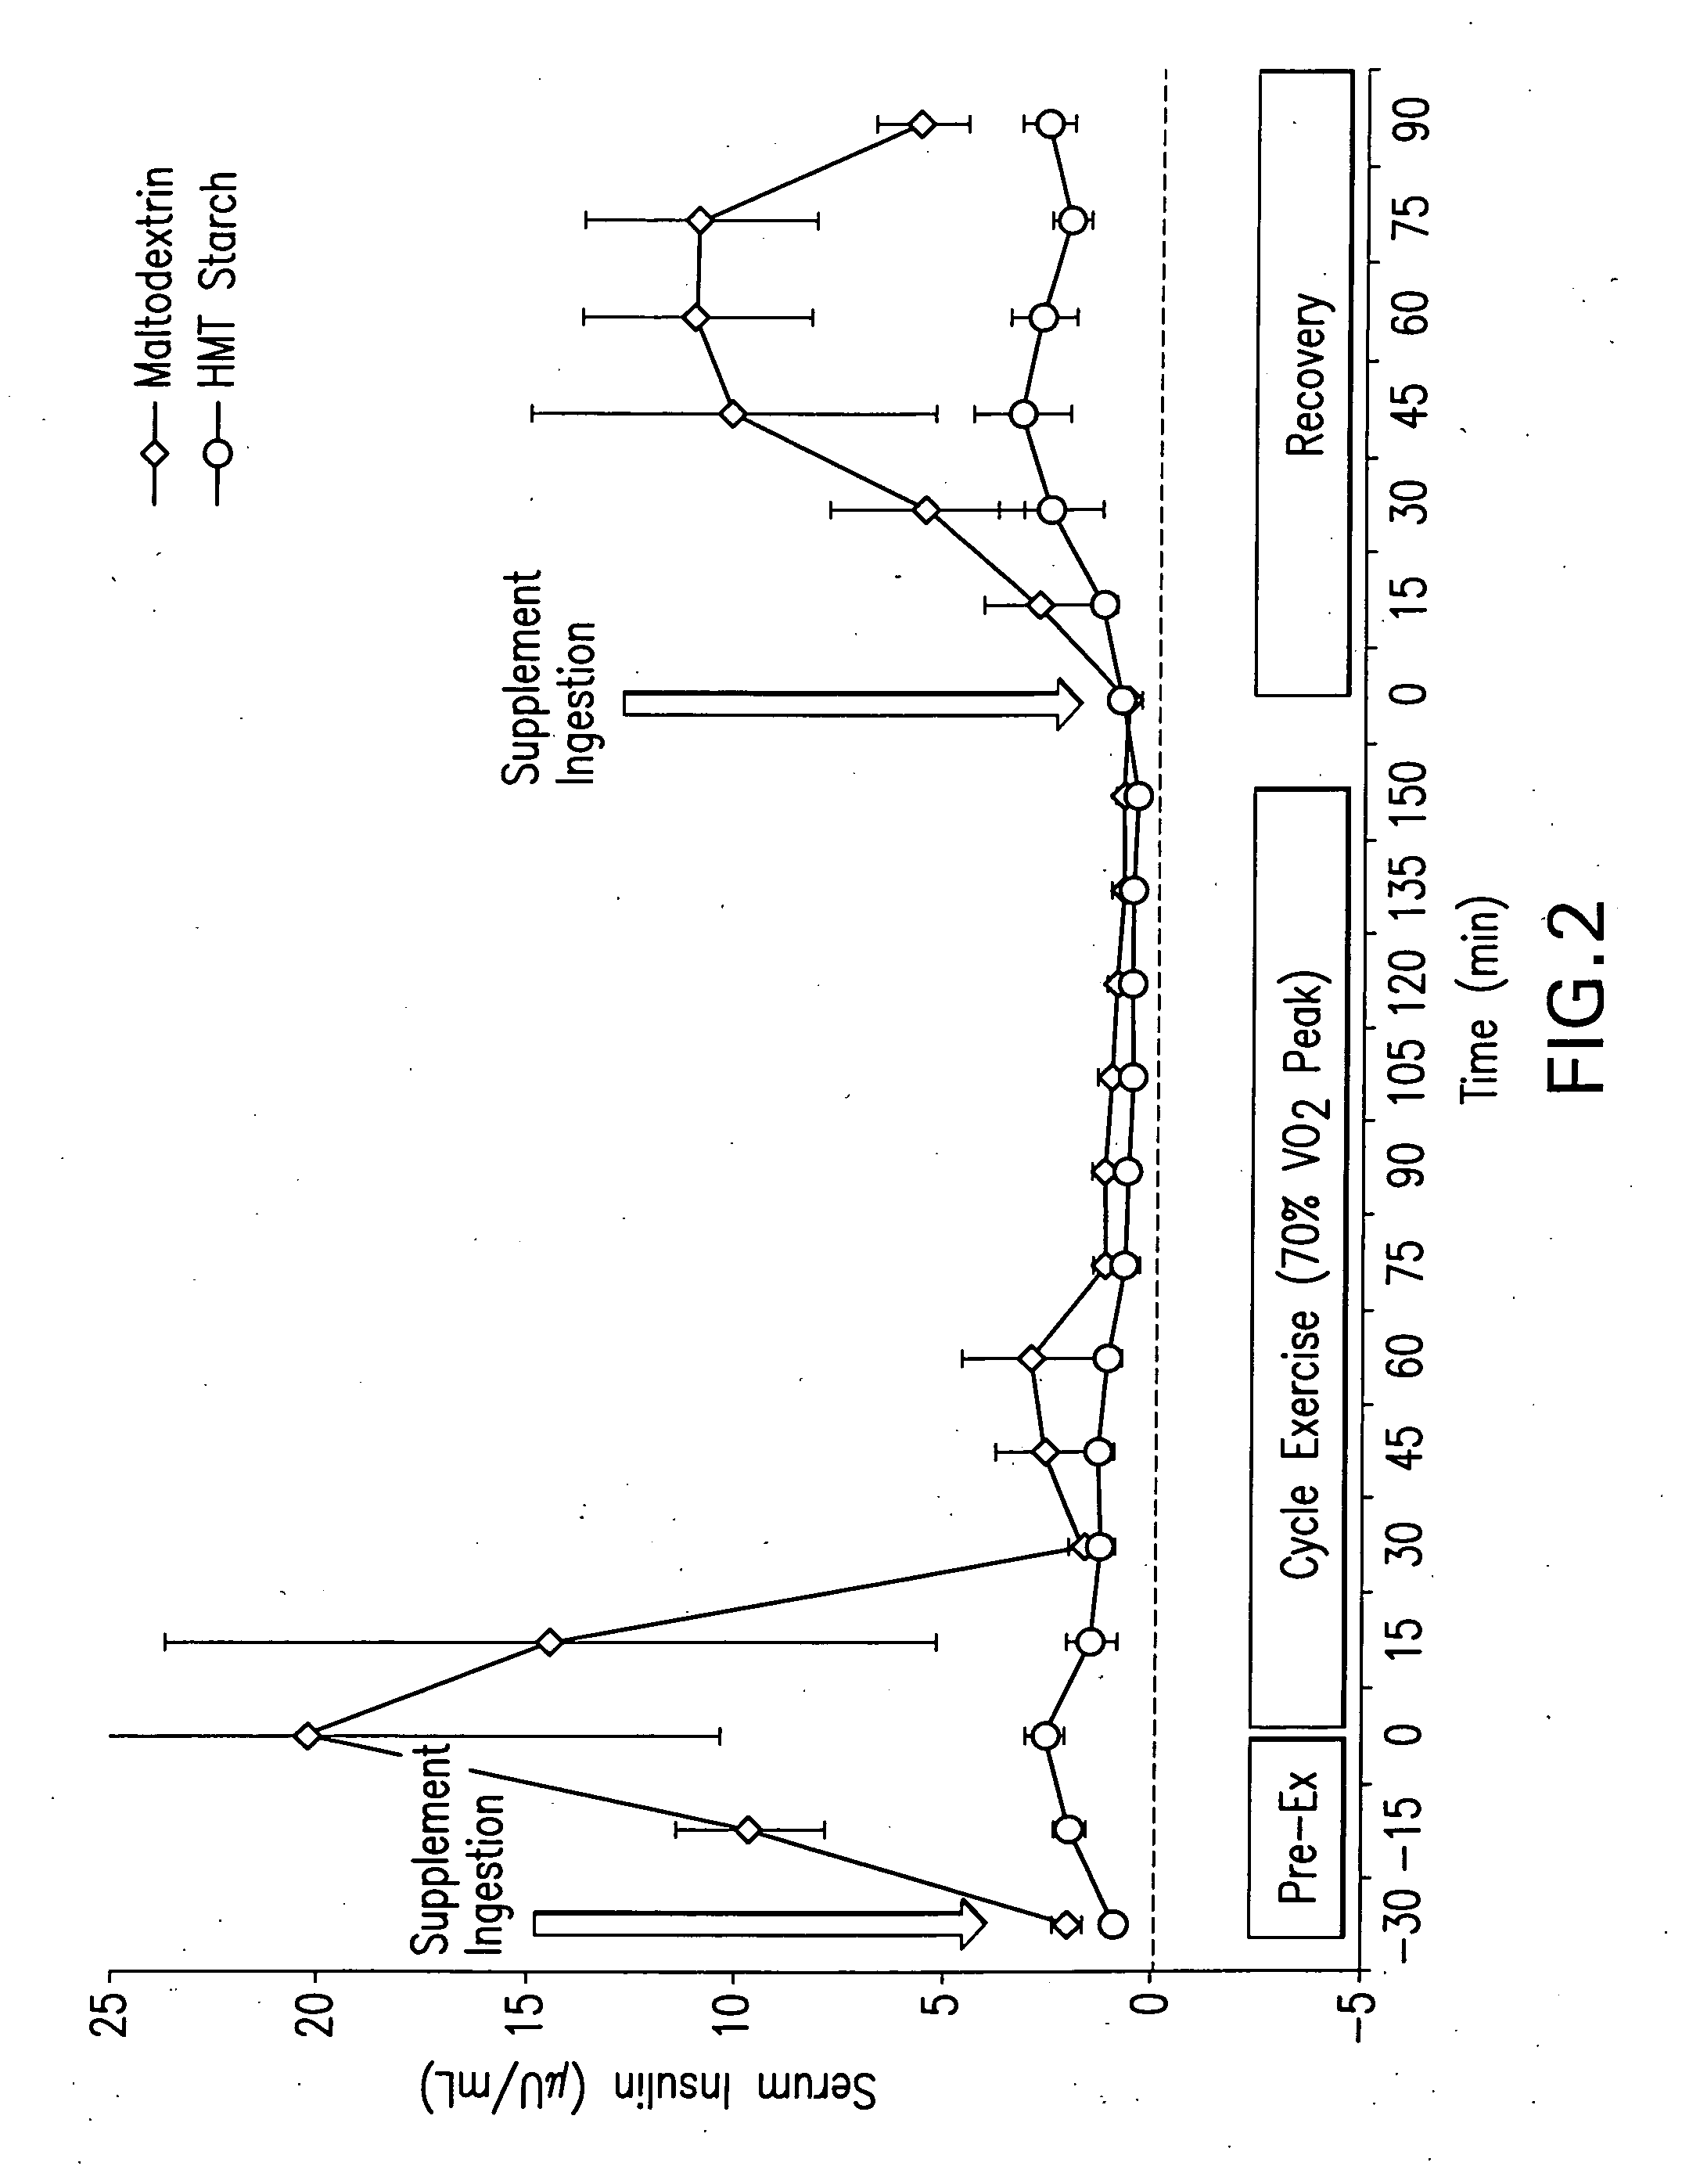 Heat moisture treated carbohydrates and uses thereof